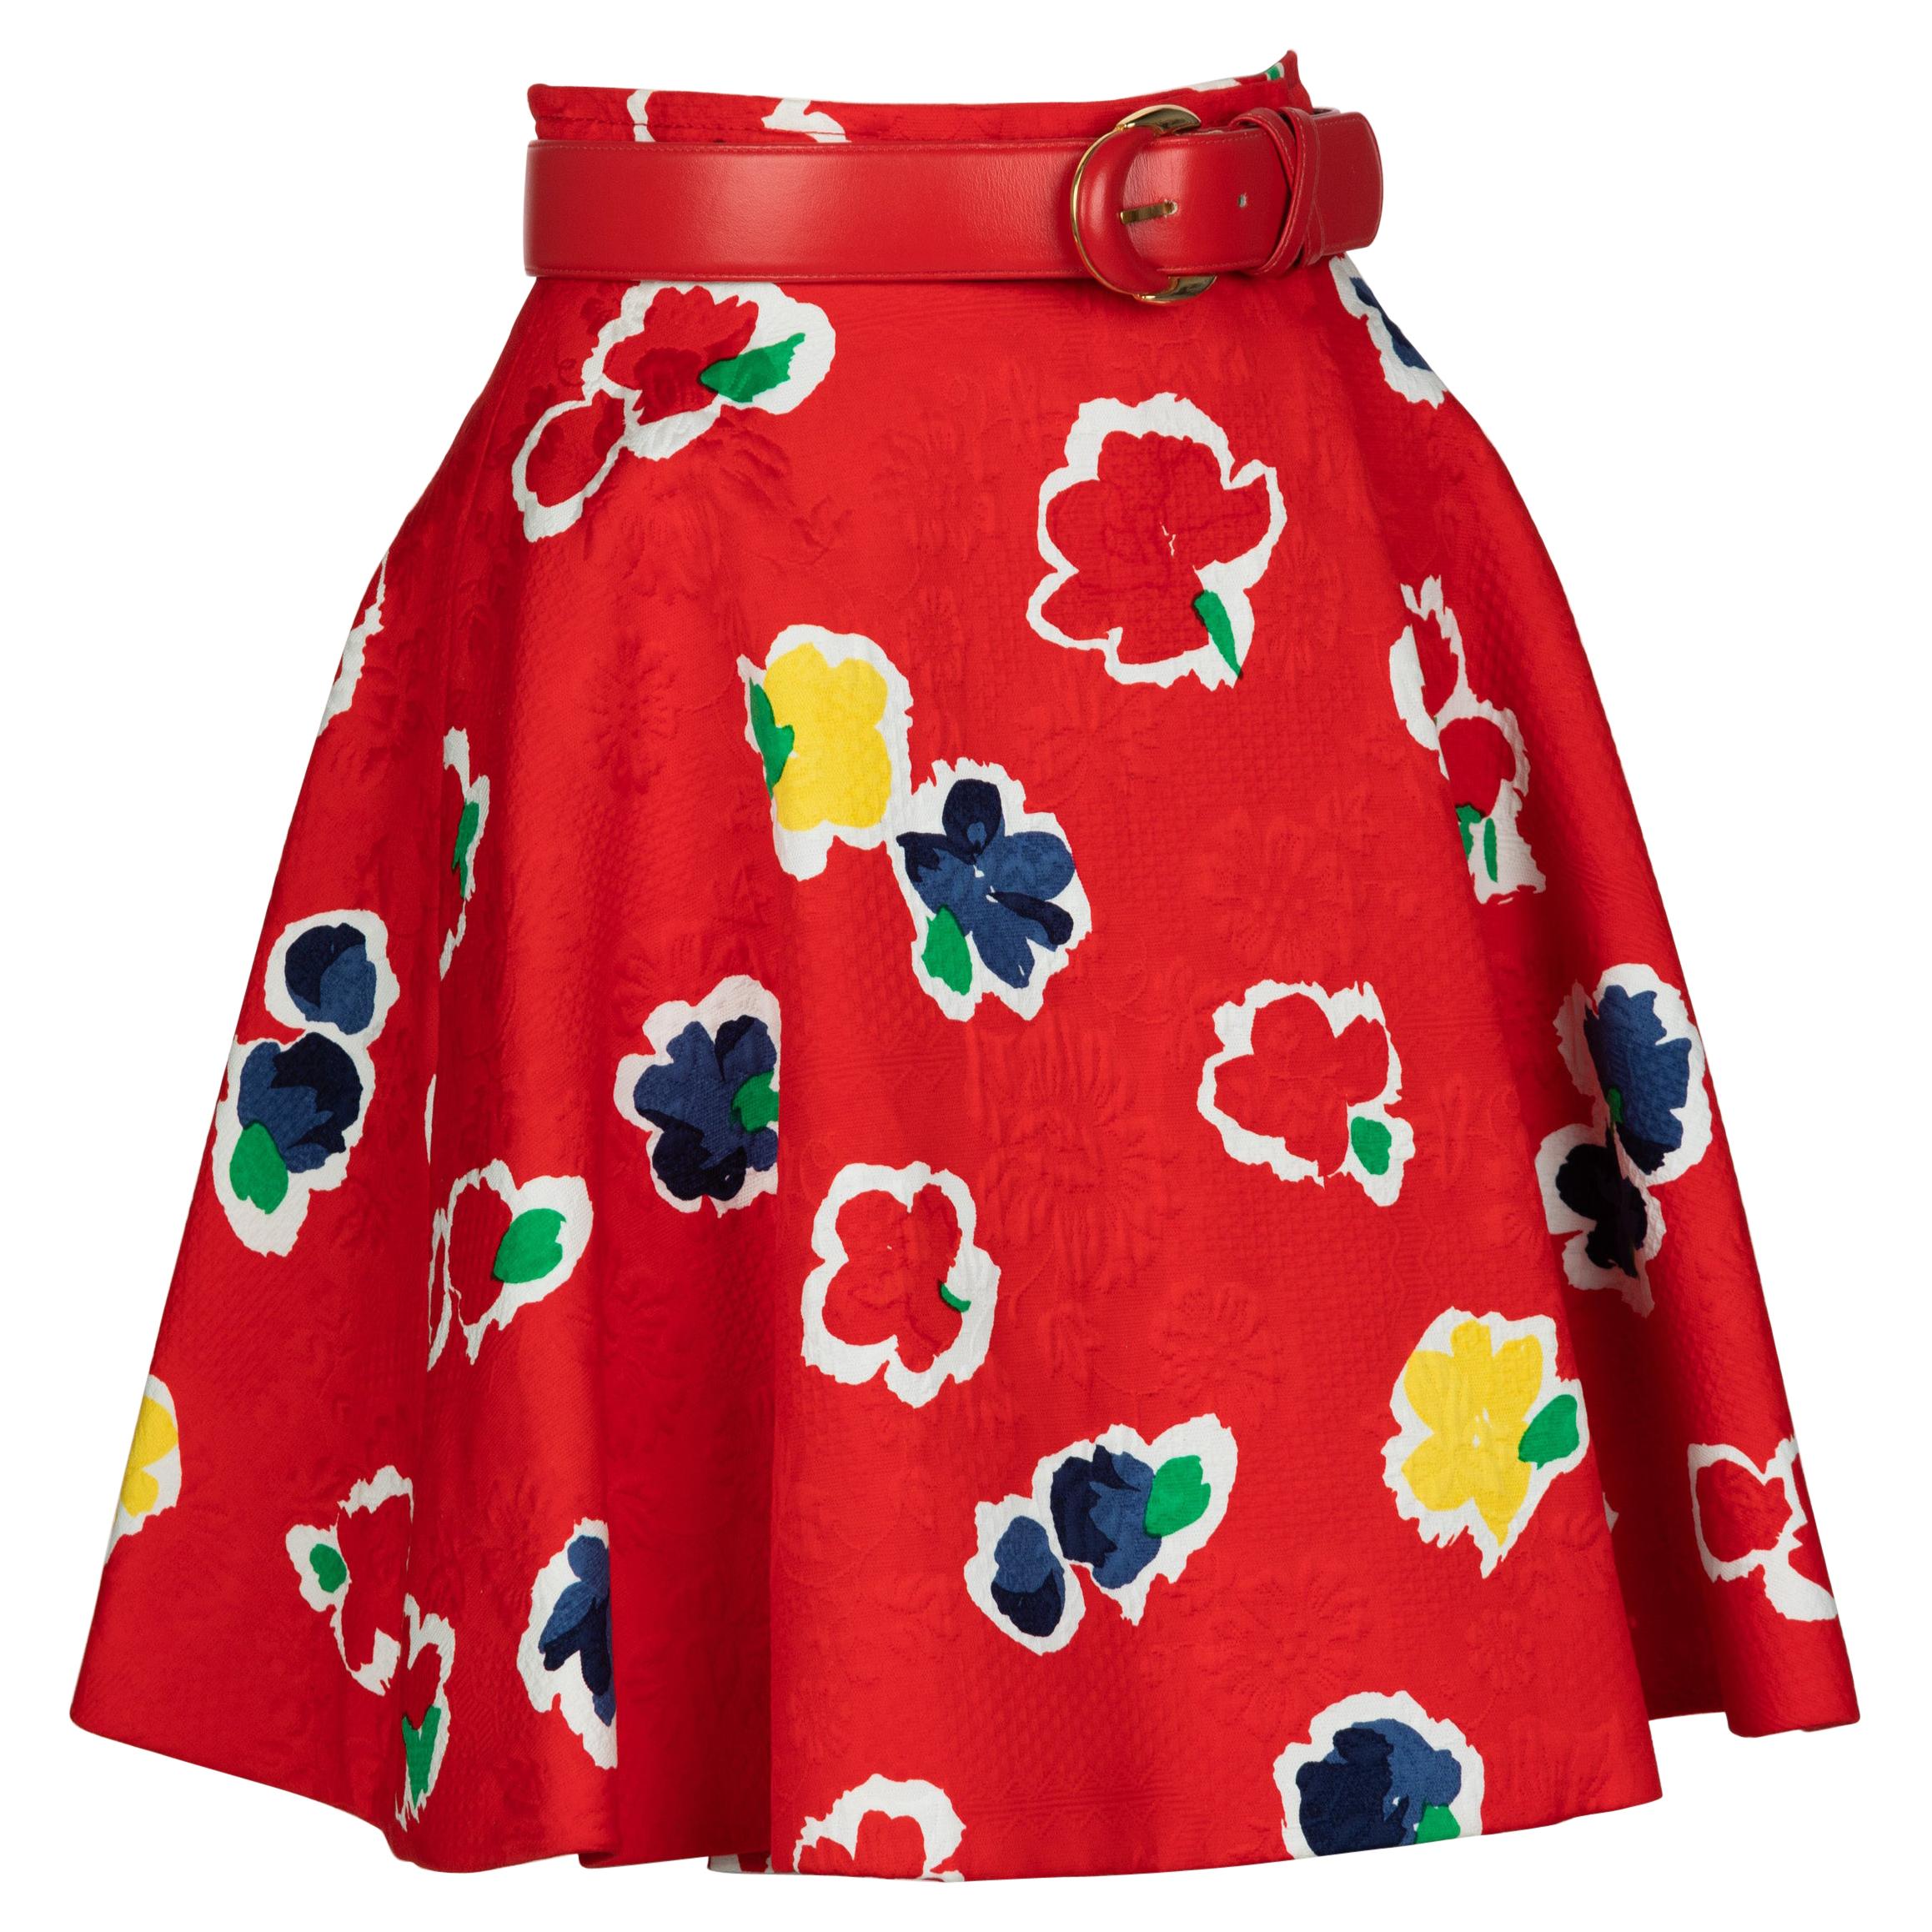 Galanos Red Floral Cotton Wrap Skirt w/ Belt, 1980s For Sale